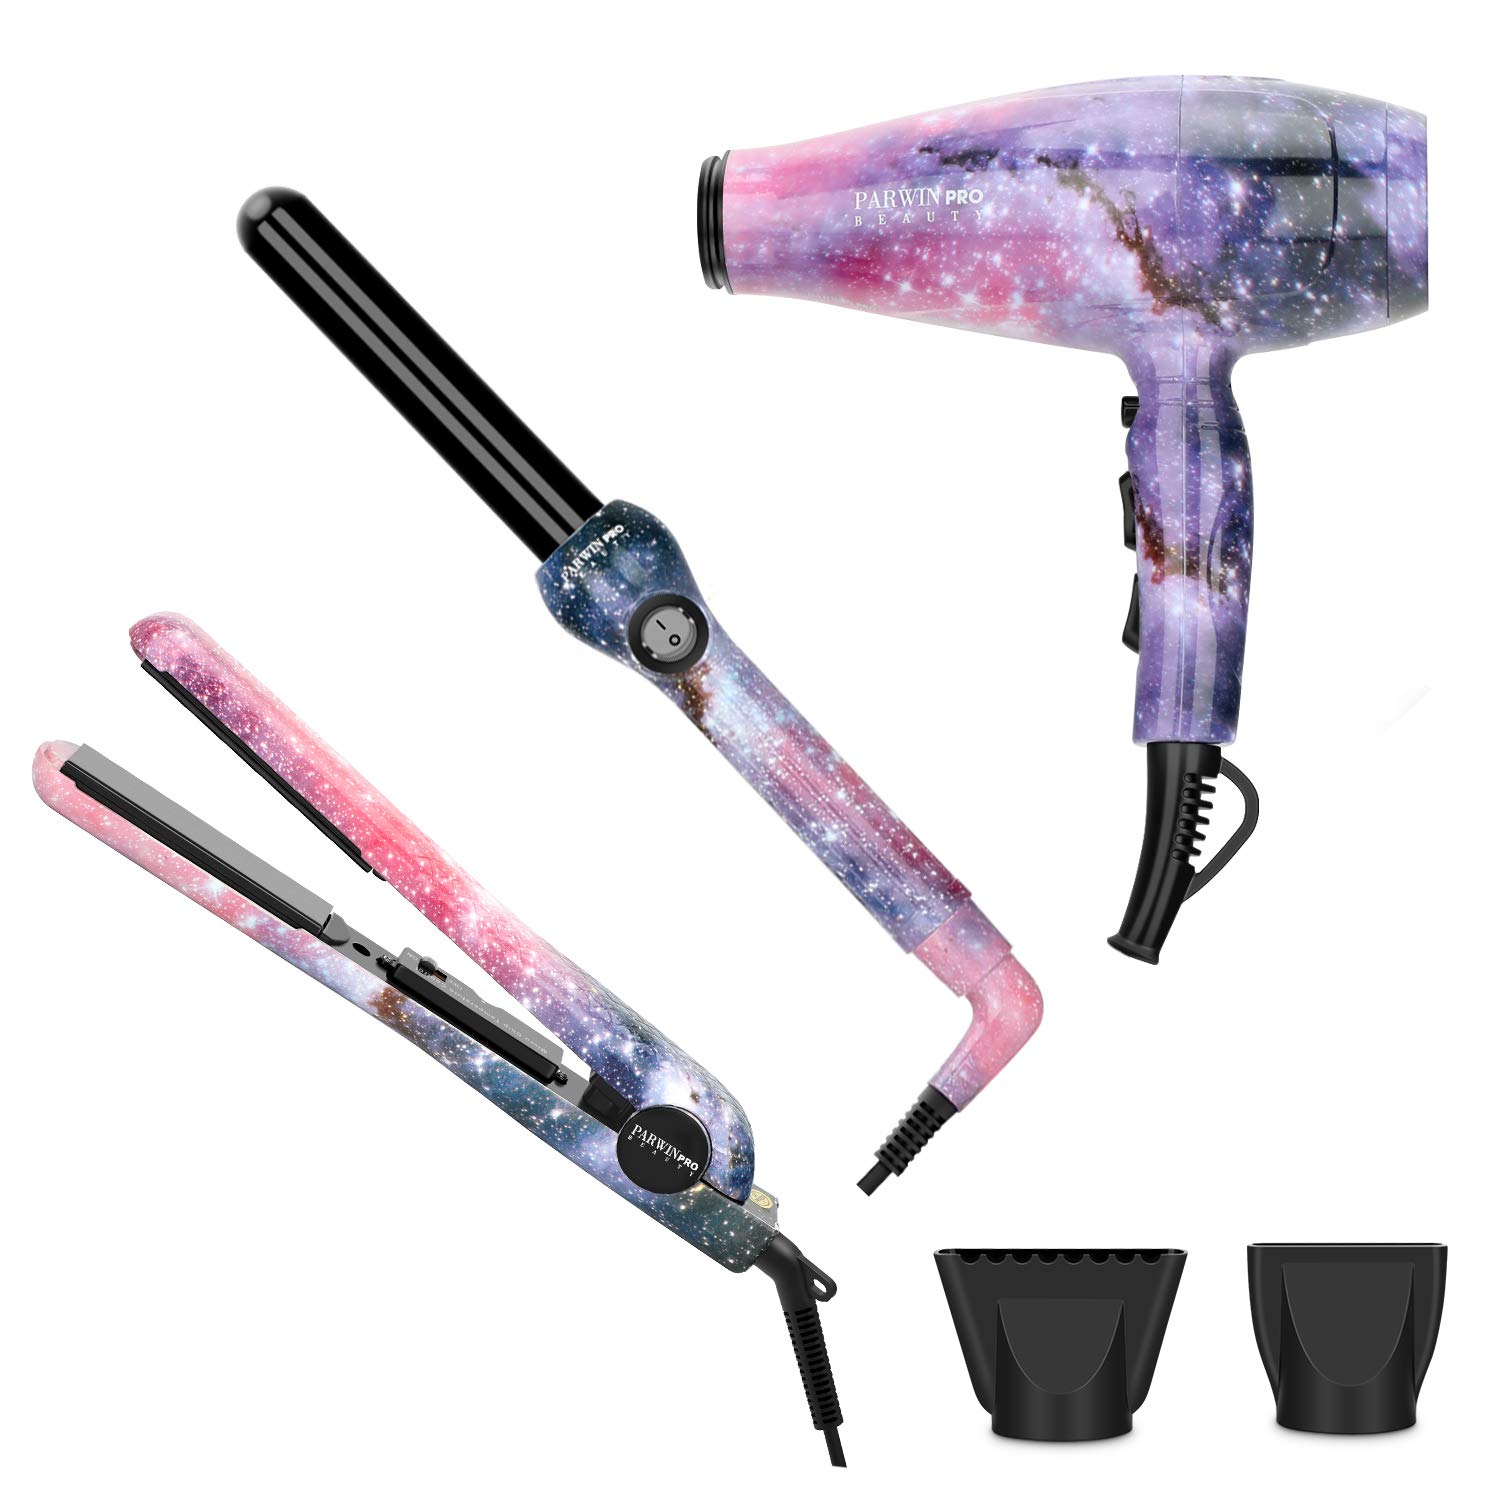 Mua PARWIN PRO BEAUTY Hair Styling Set - 1875w Professional Hair Dryer - 1  Inch Titanium Curling Iron- 1 Inch Anti-Static Hair Straightener- Negative  Ionic Technology - Pack of 3, for All